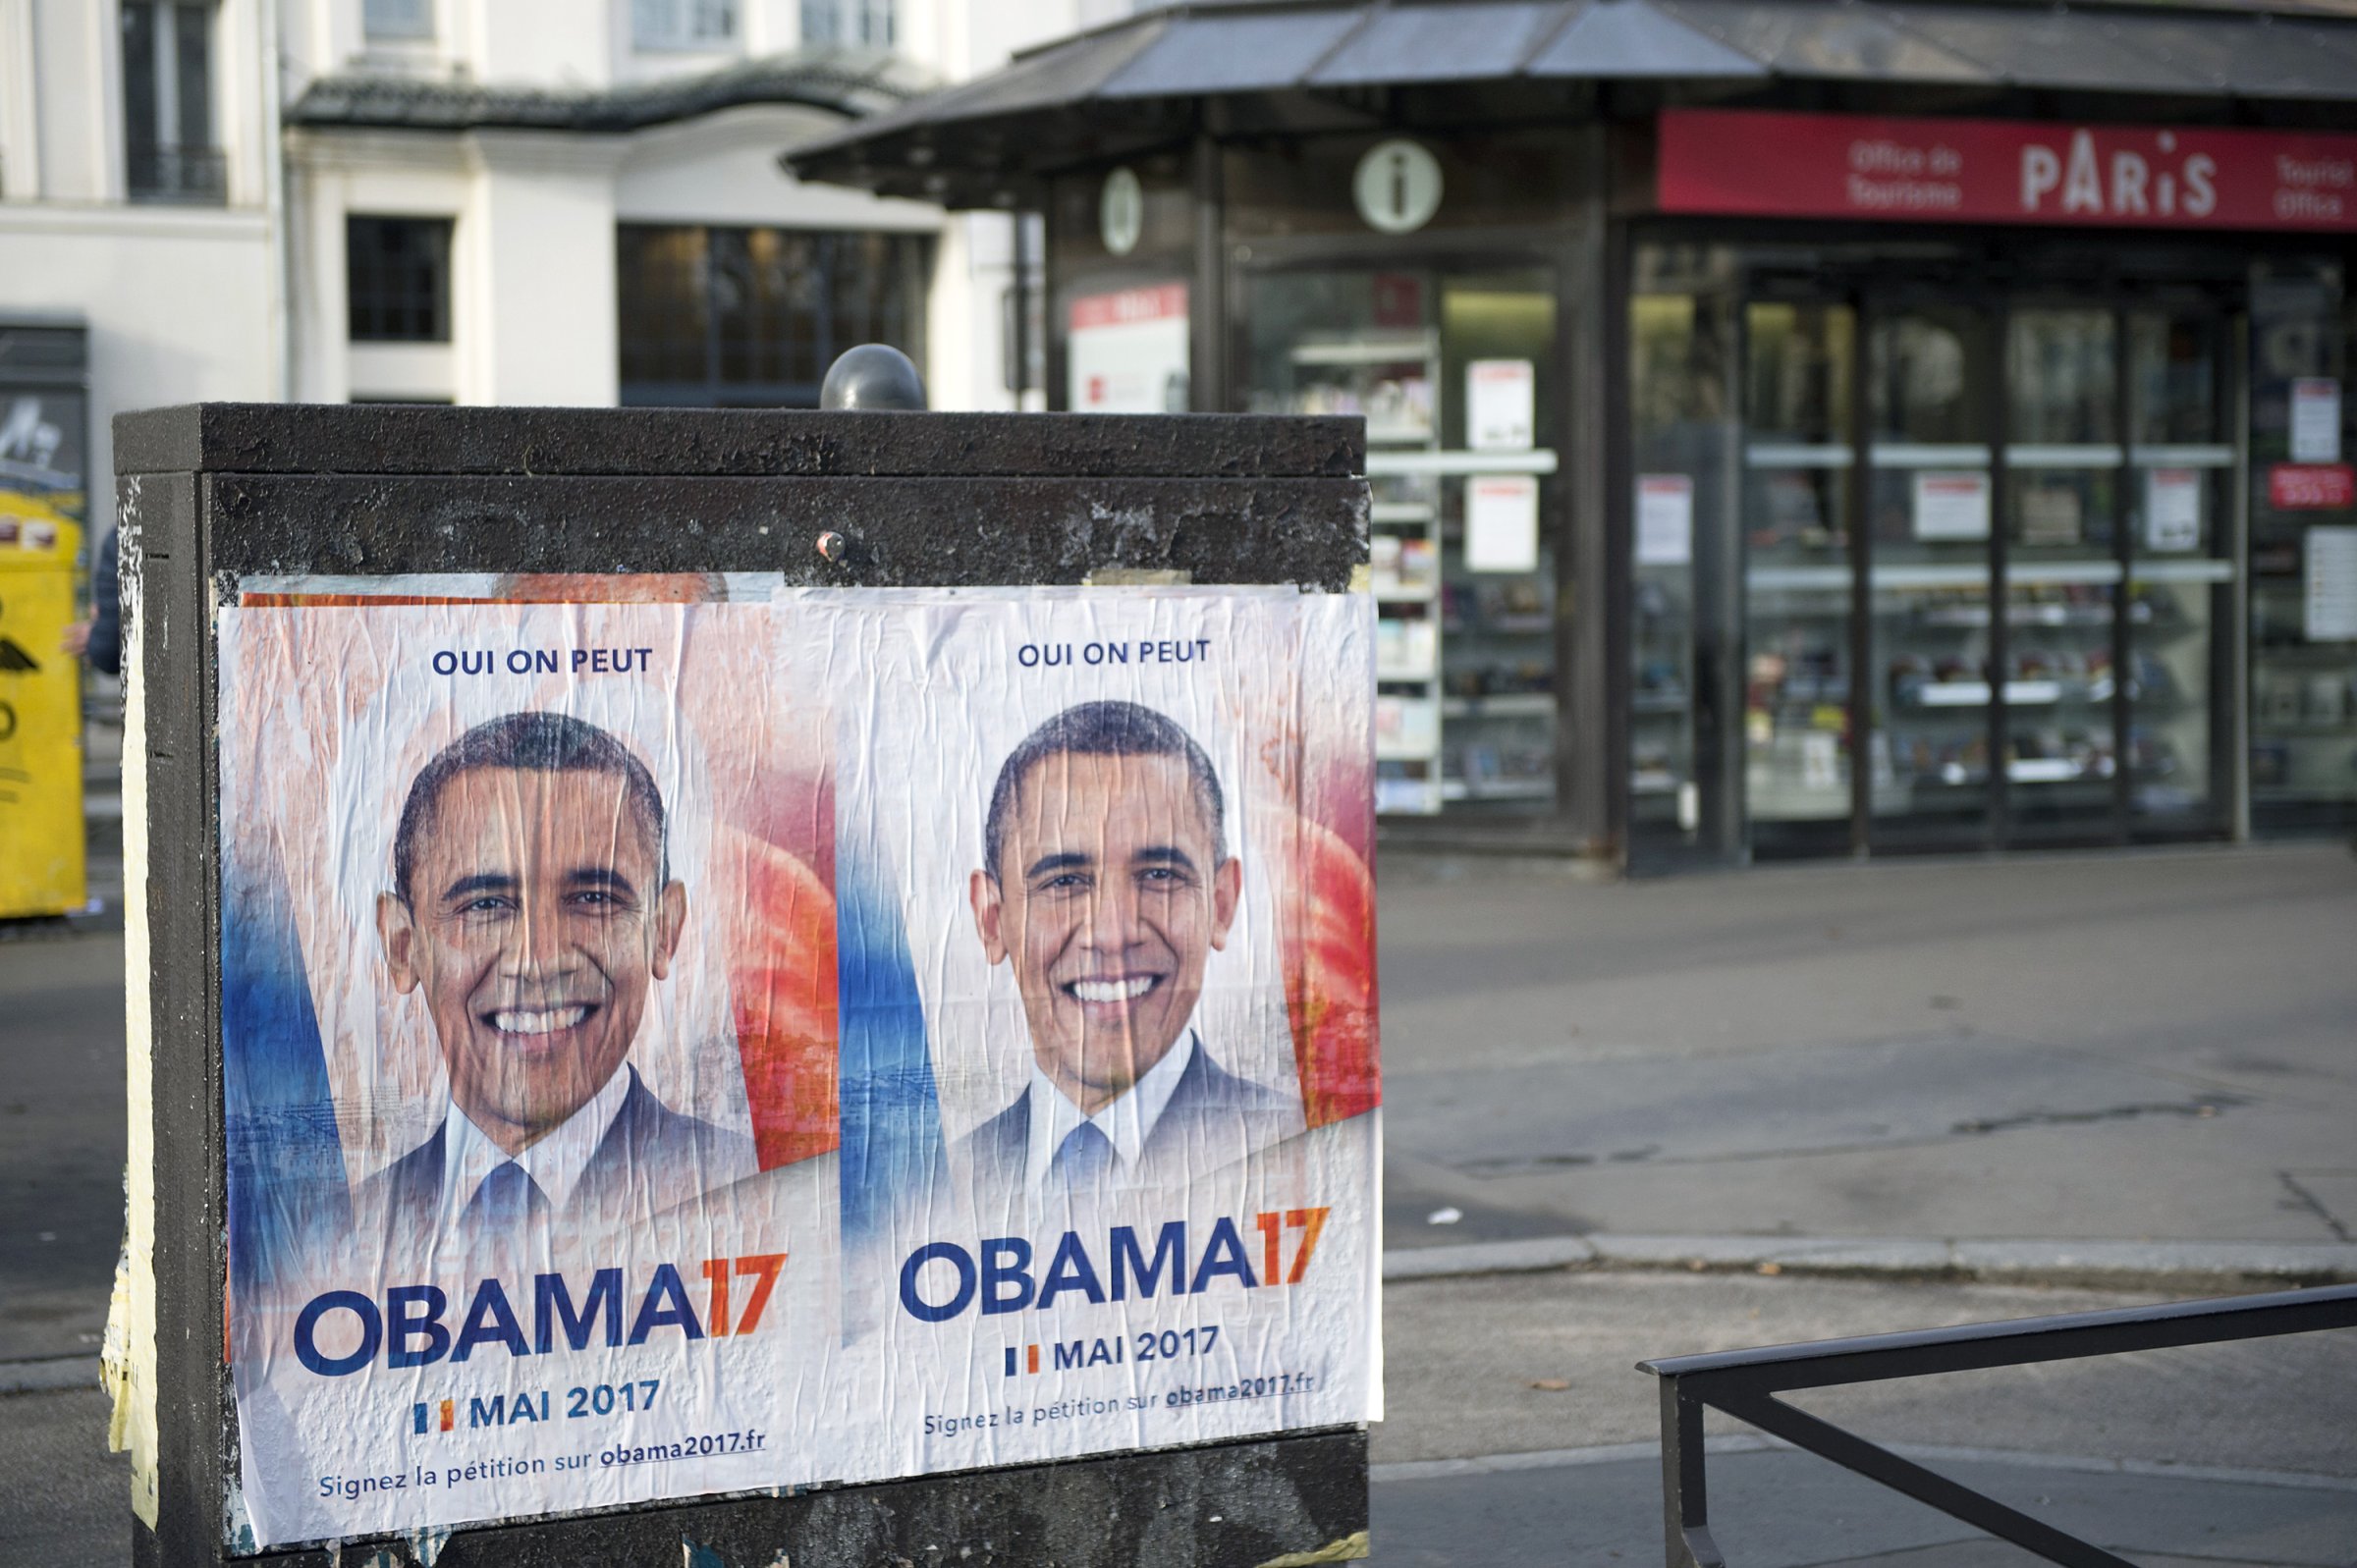 "Obama17" Posters Are Displayed Across Paris